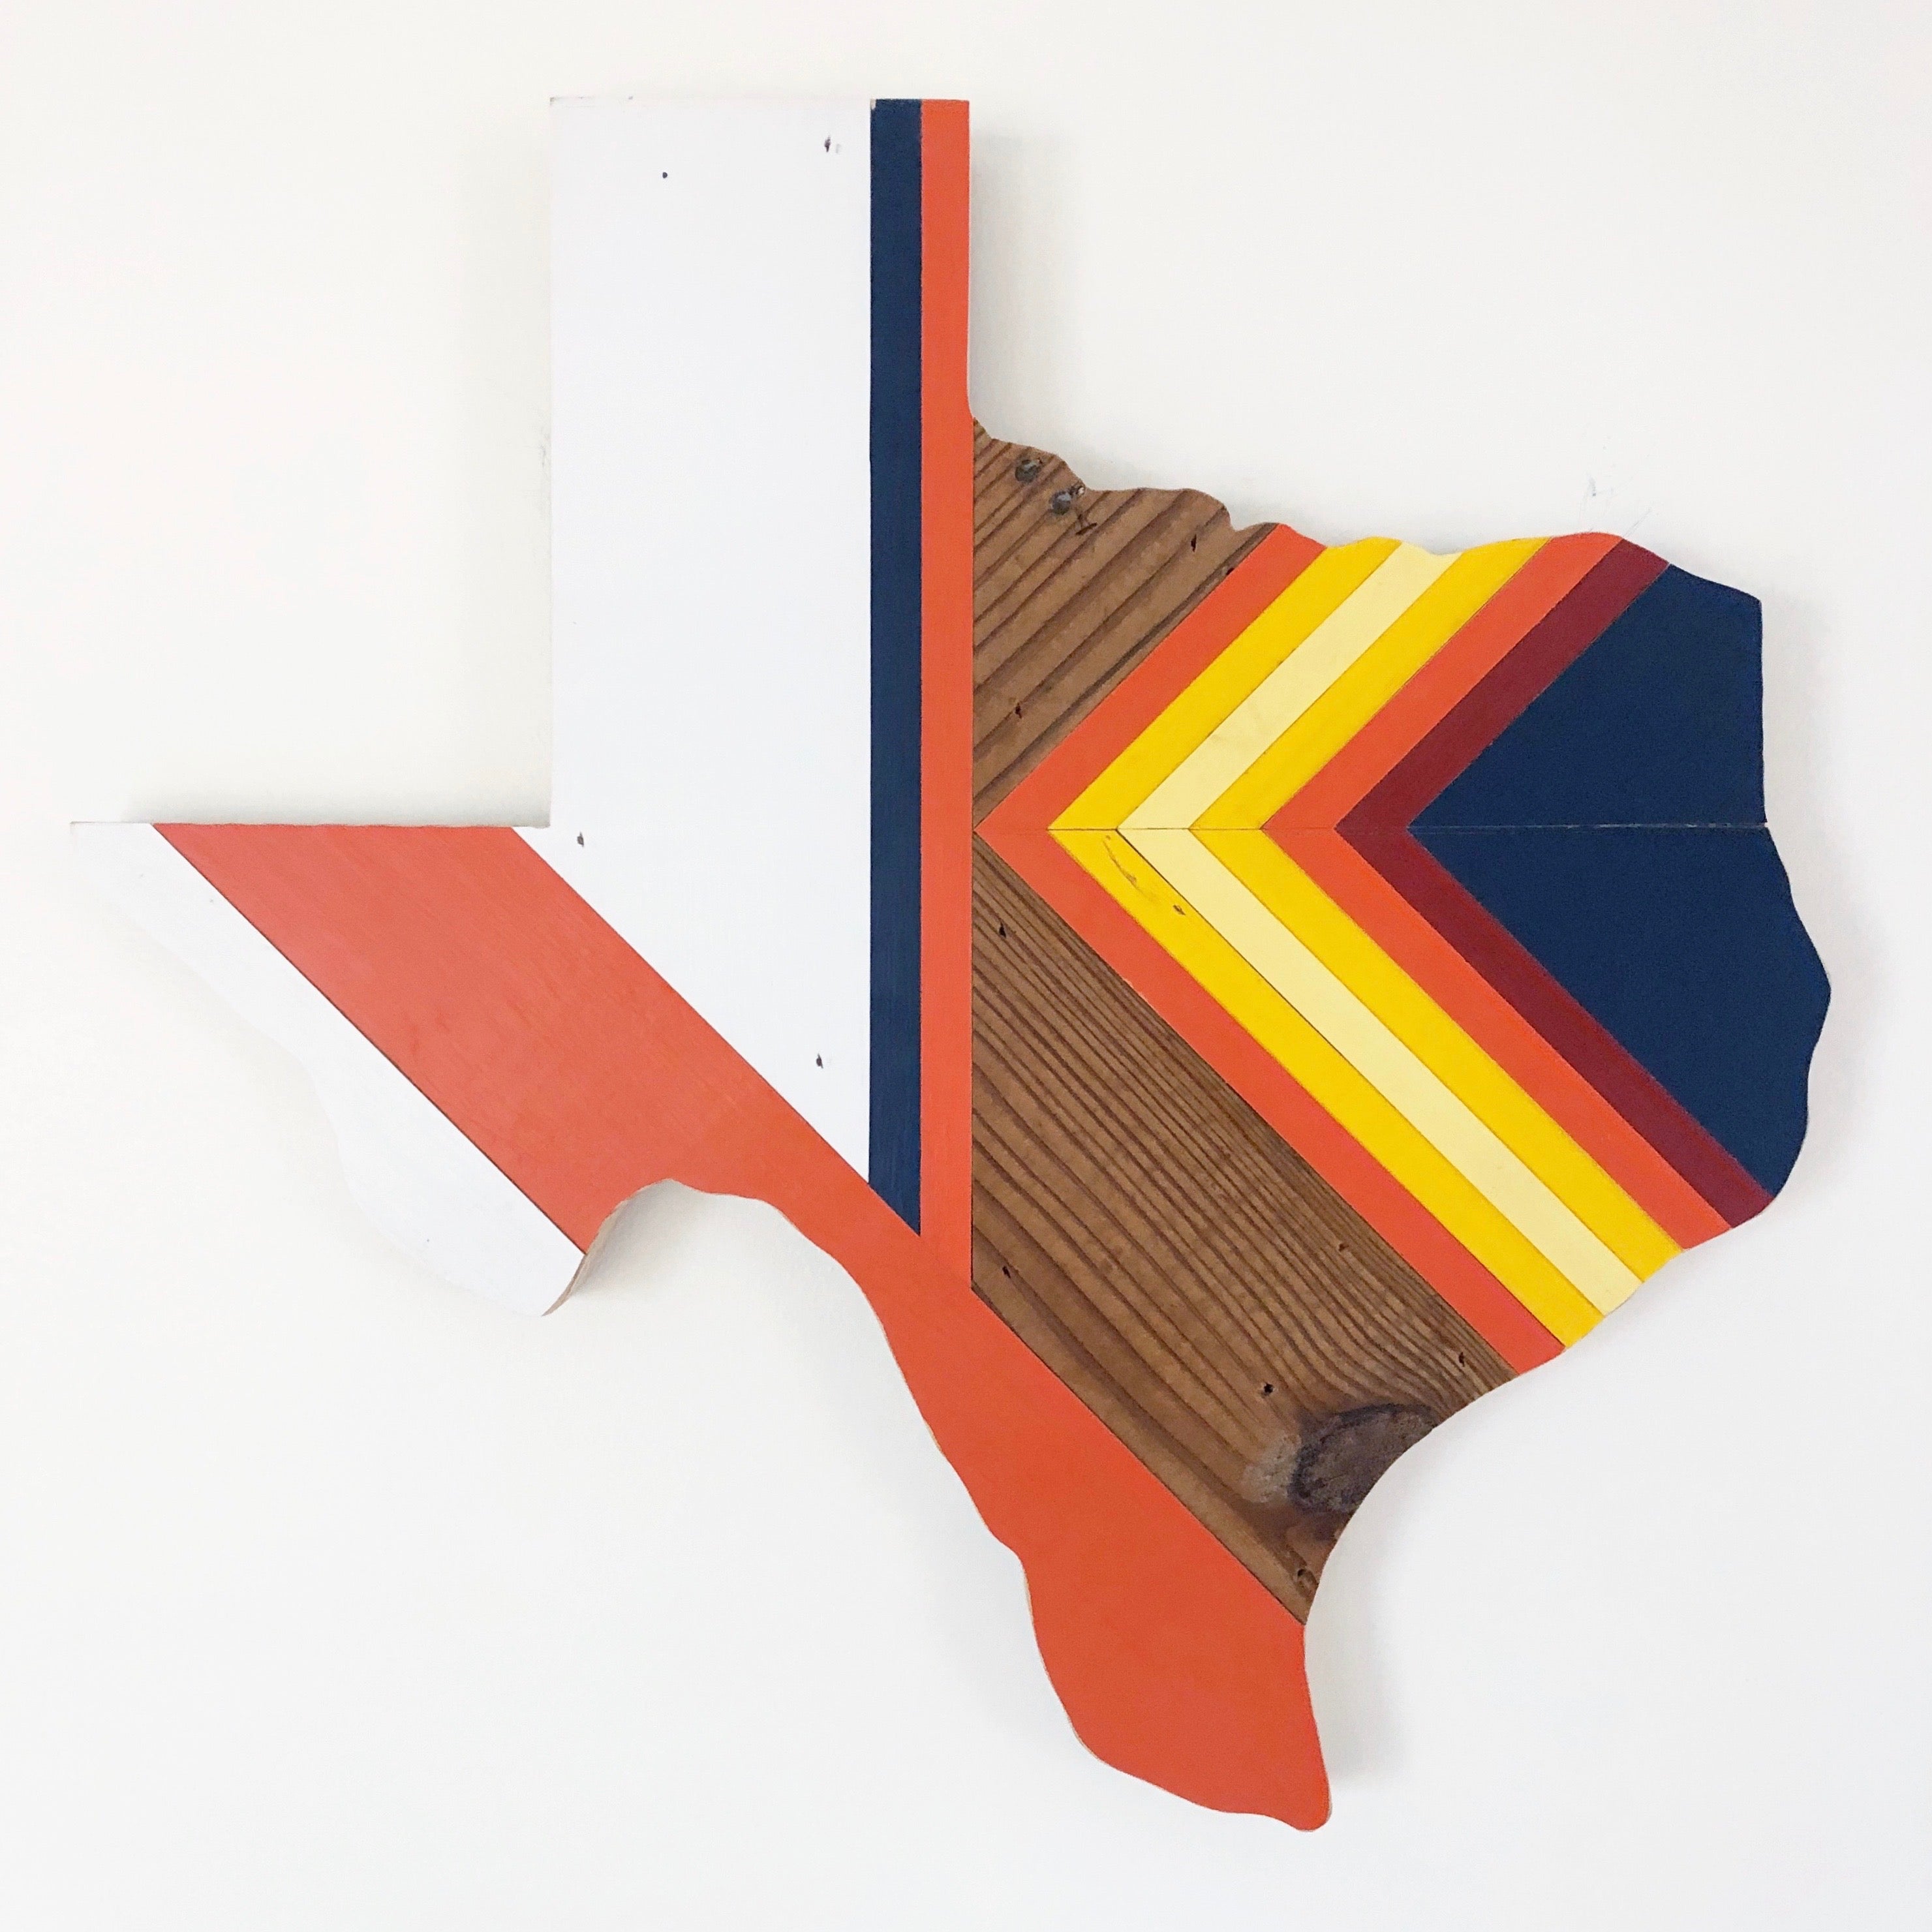 '76 WEST TEXAS - 'STROS - 18" (One-of-a-Kind)